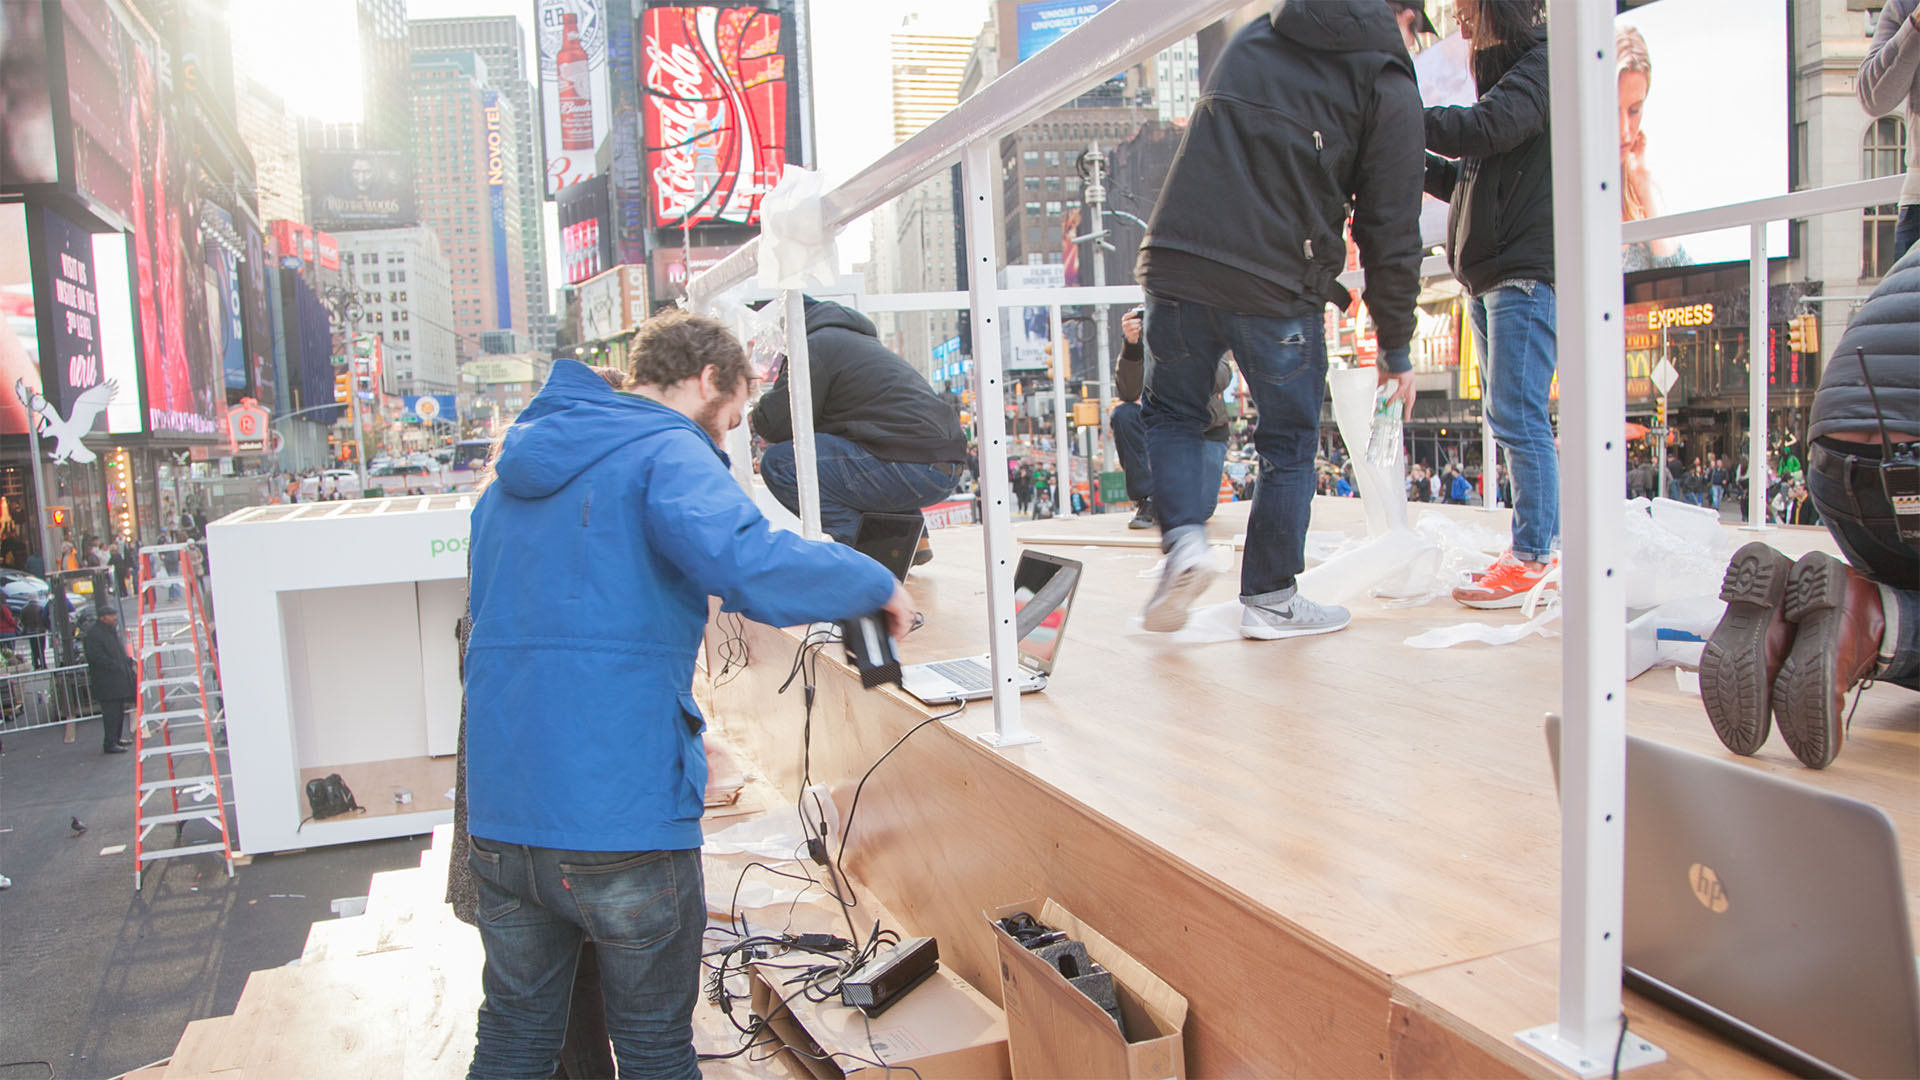 Behind the Scenes - Google Androidify Kinect Game in Times Square New York City